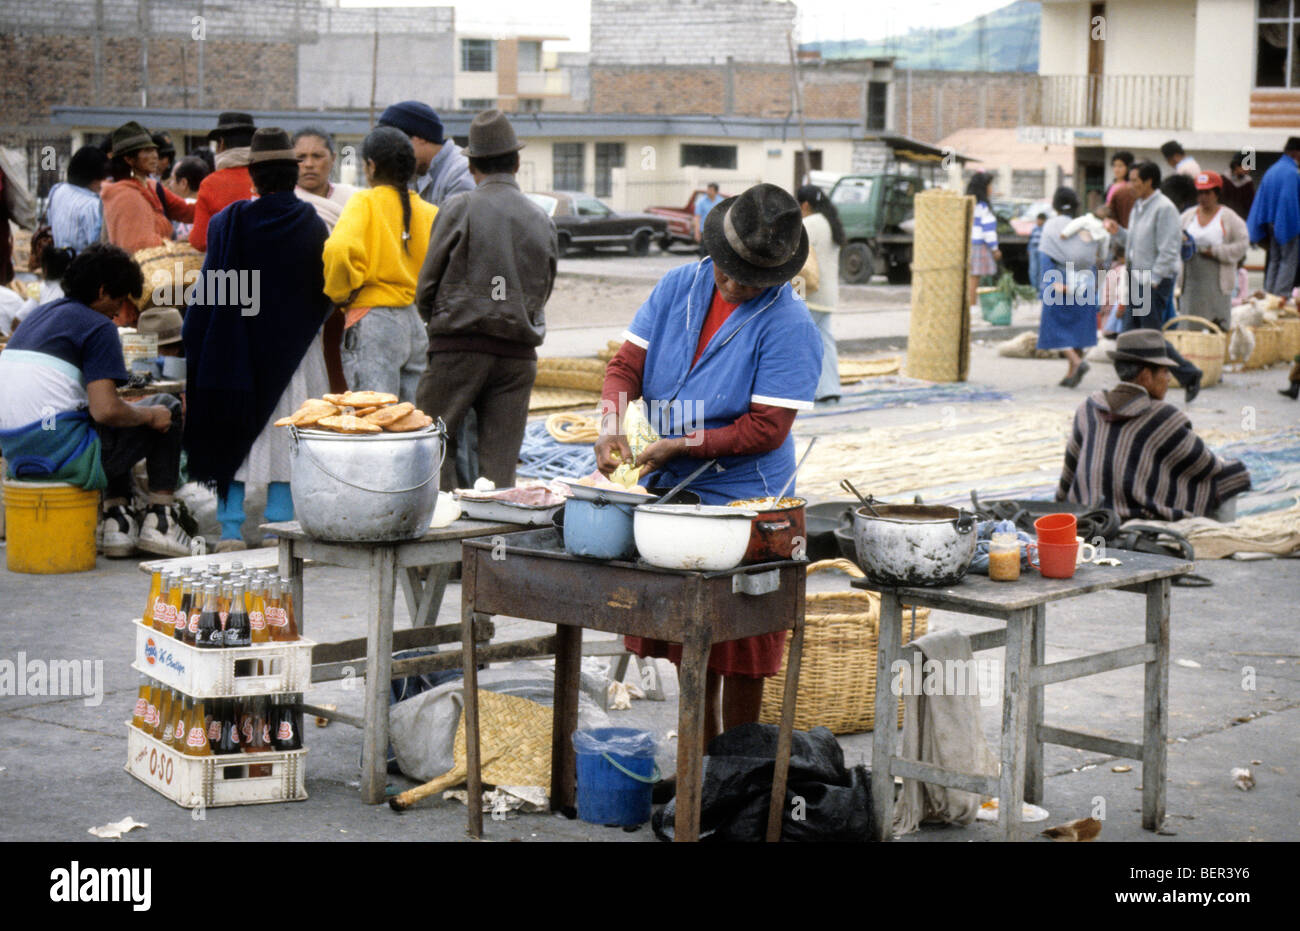 Prepared food seller in local upland ecuador market makes a new batch of pancake like foods. Stock Photo